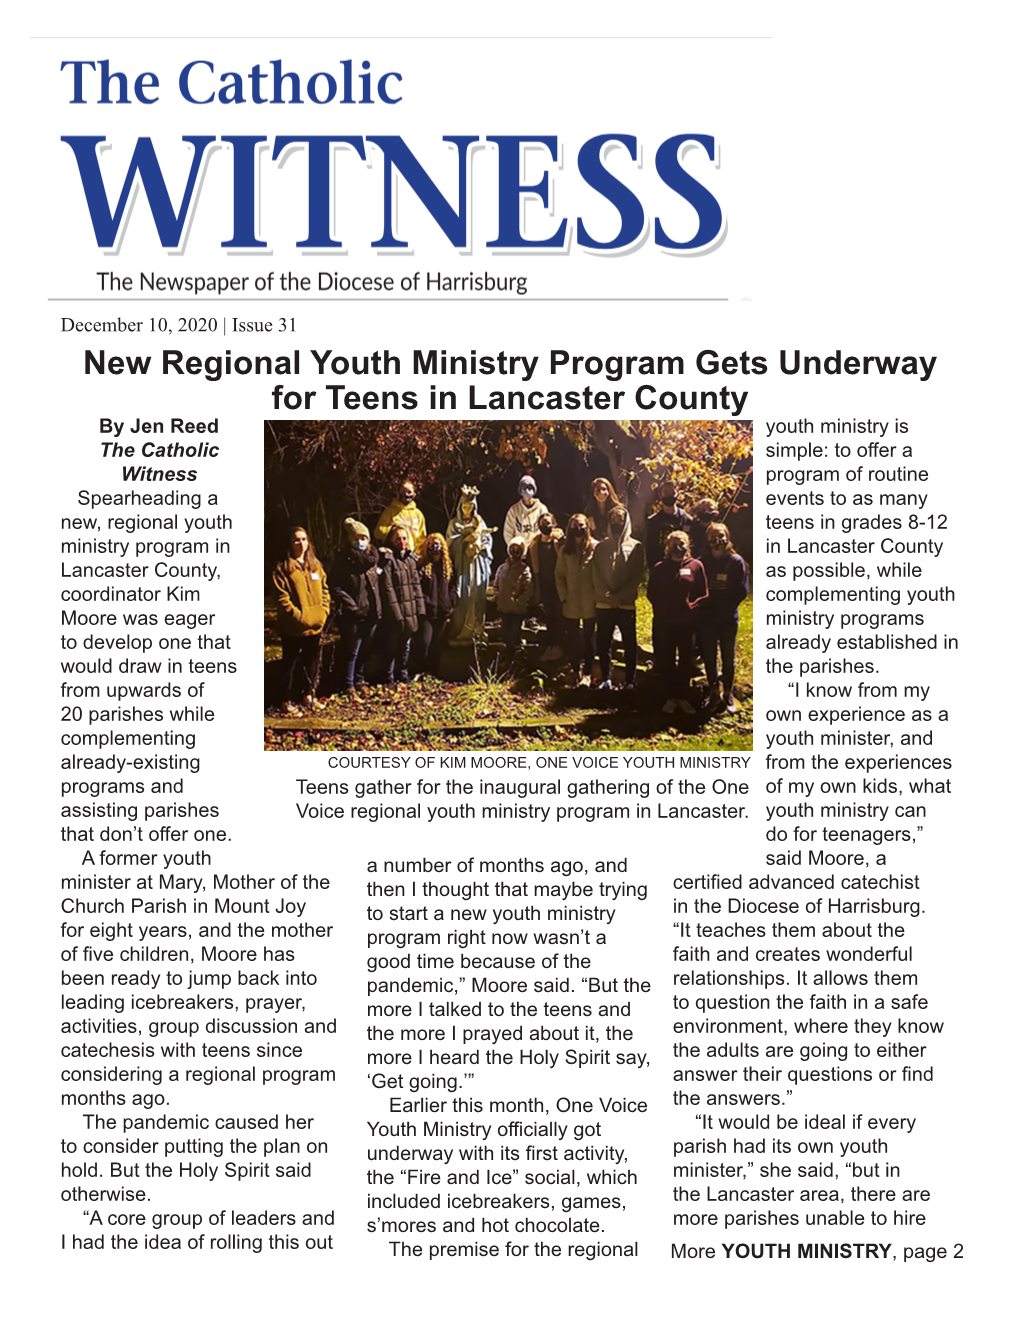 New Regional Youth Ministry Program Gets Underway for Teens In